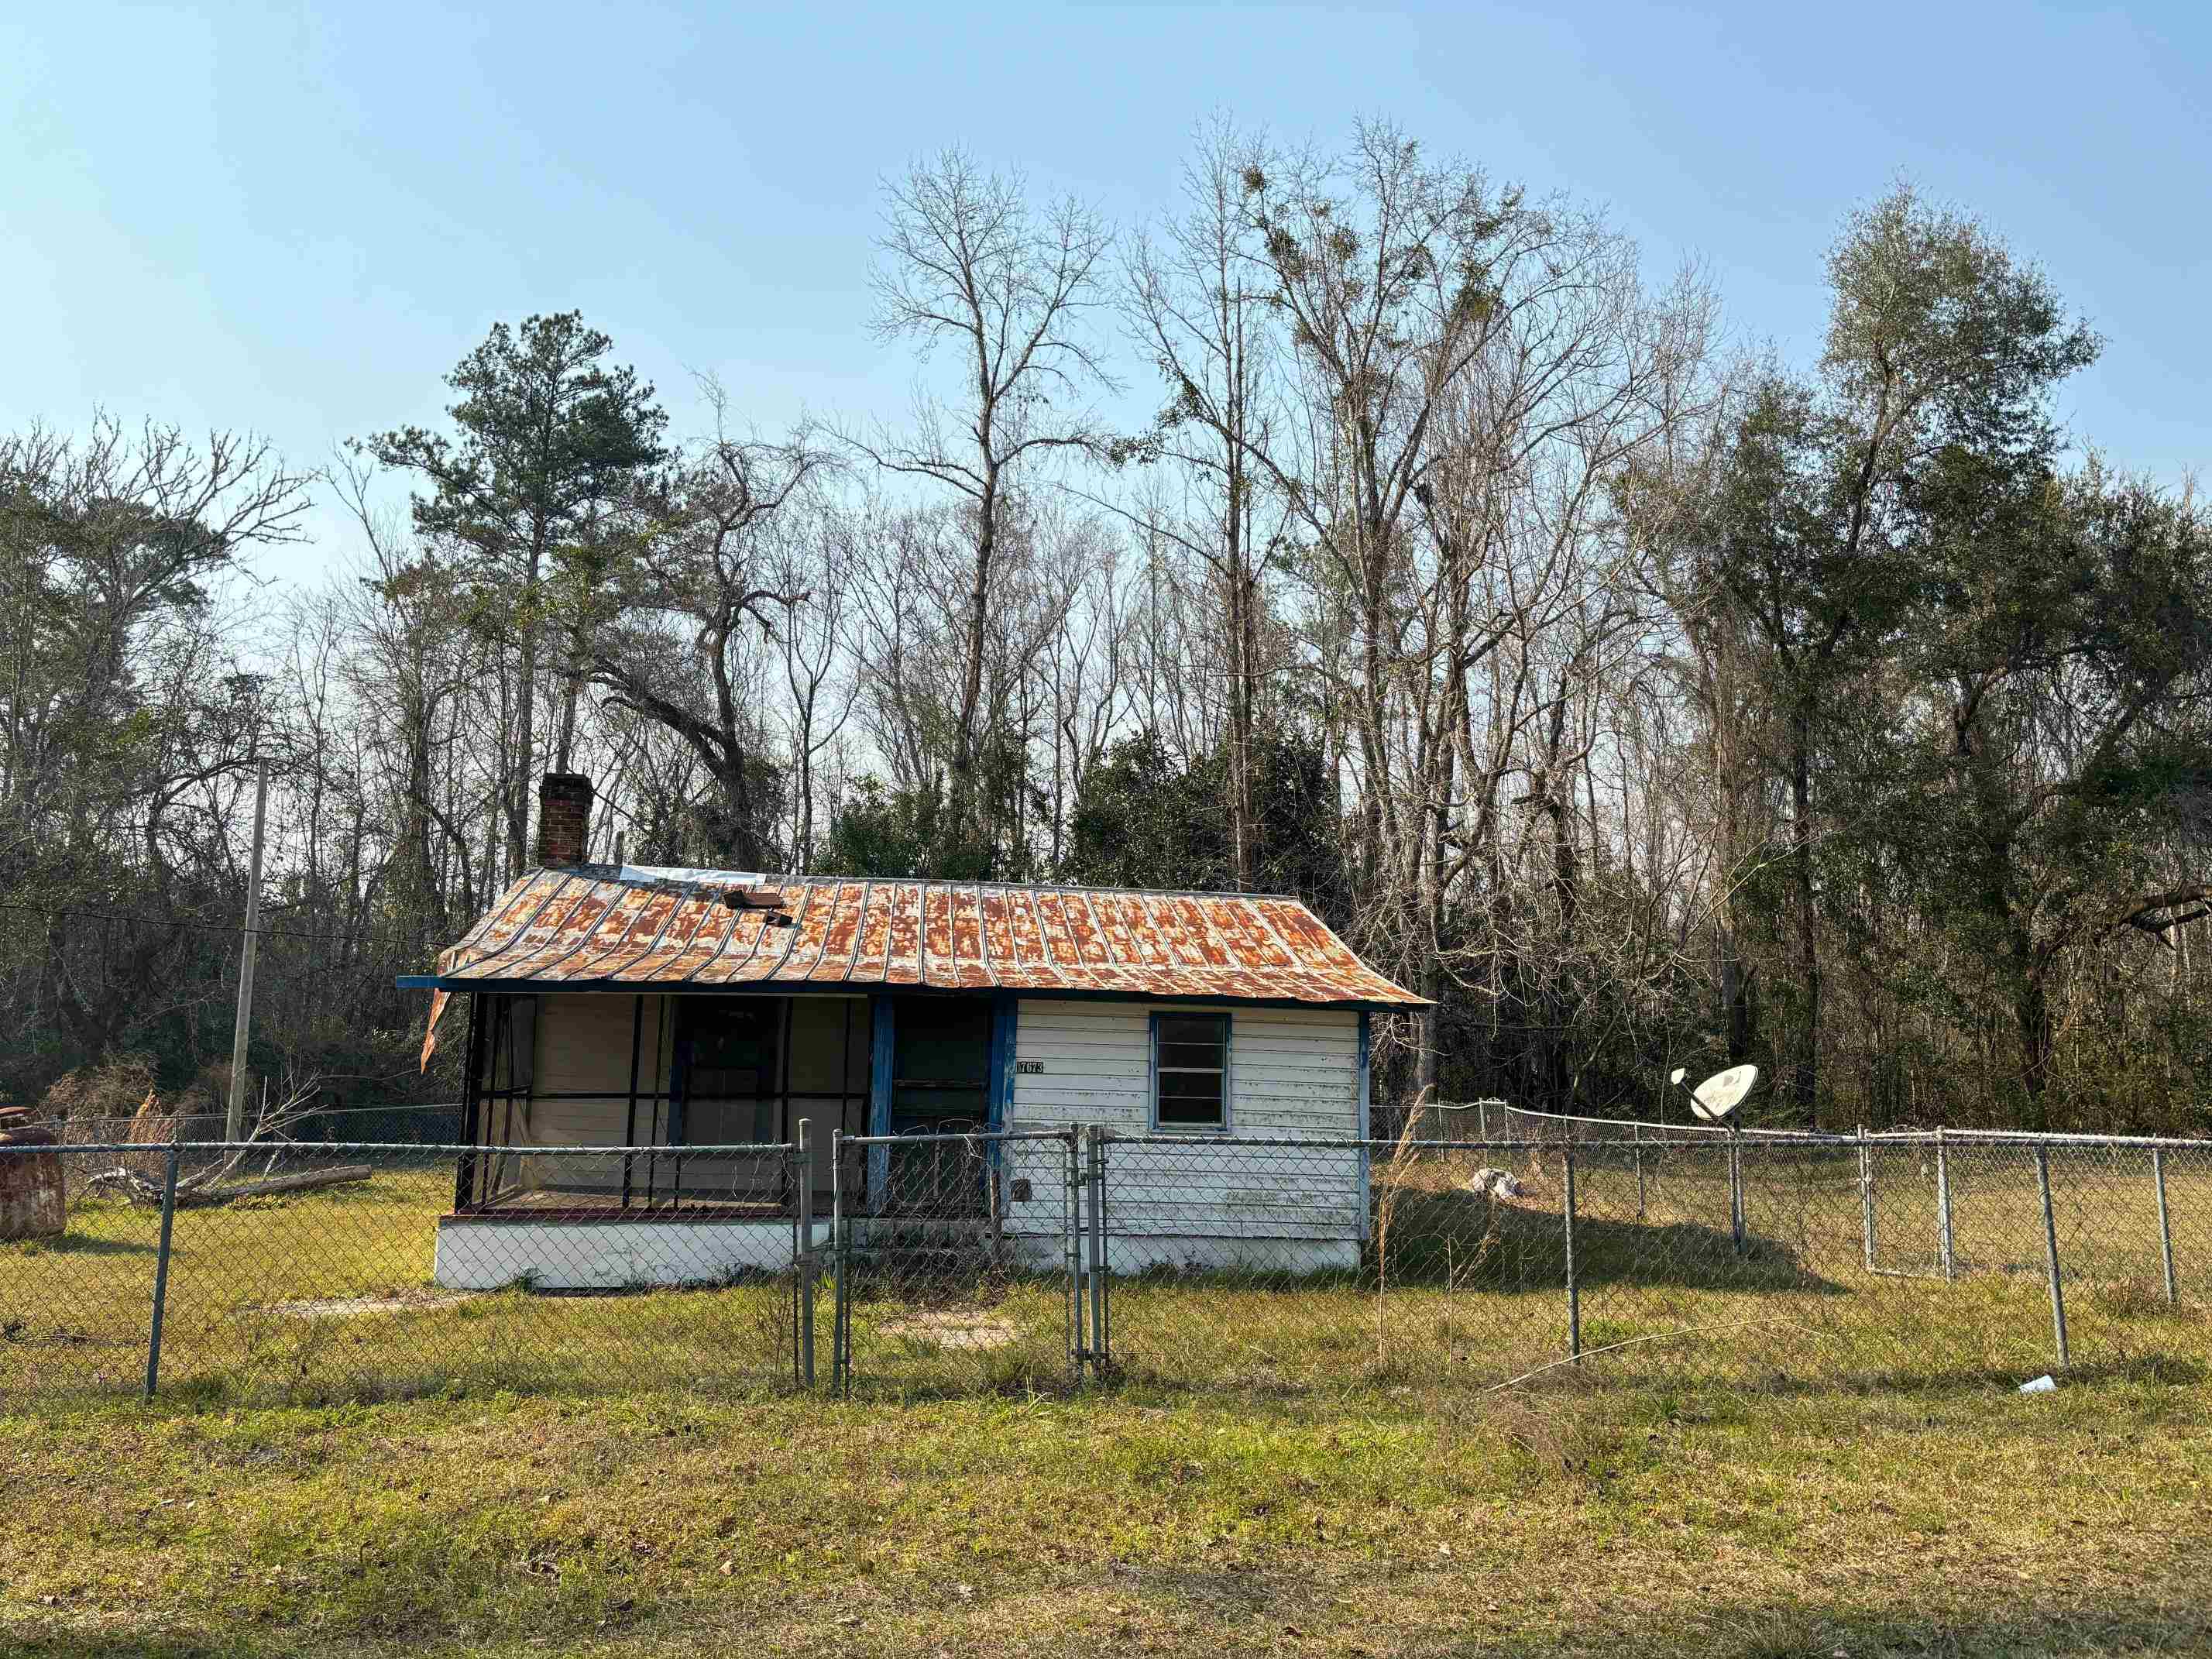 17673 State Road 65,HOSFORD,Florida 32334,Lots and land,State Road 65,368879